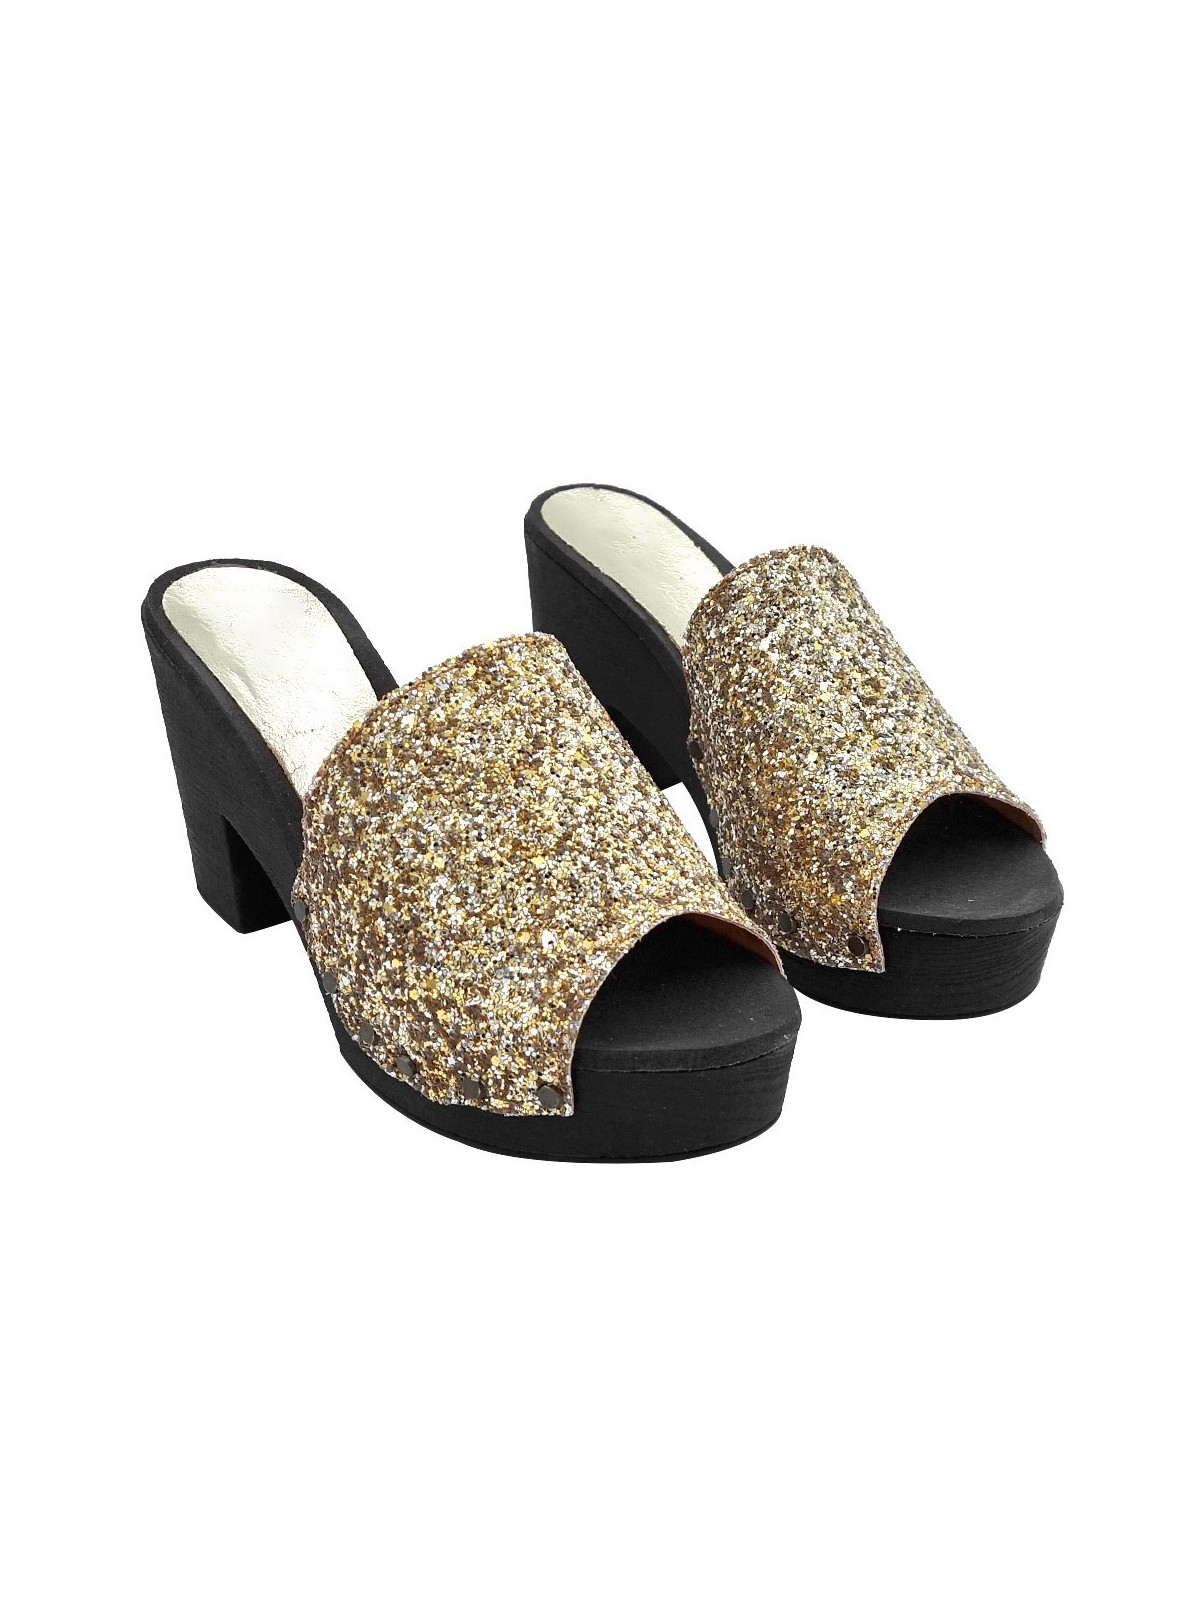 GOLD GLITTER SANDALS WITH WIDE HEEL